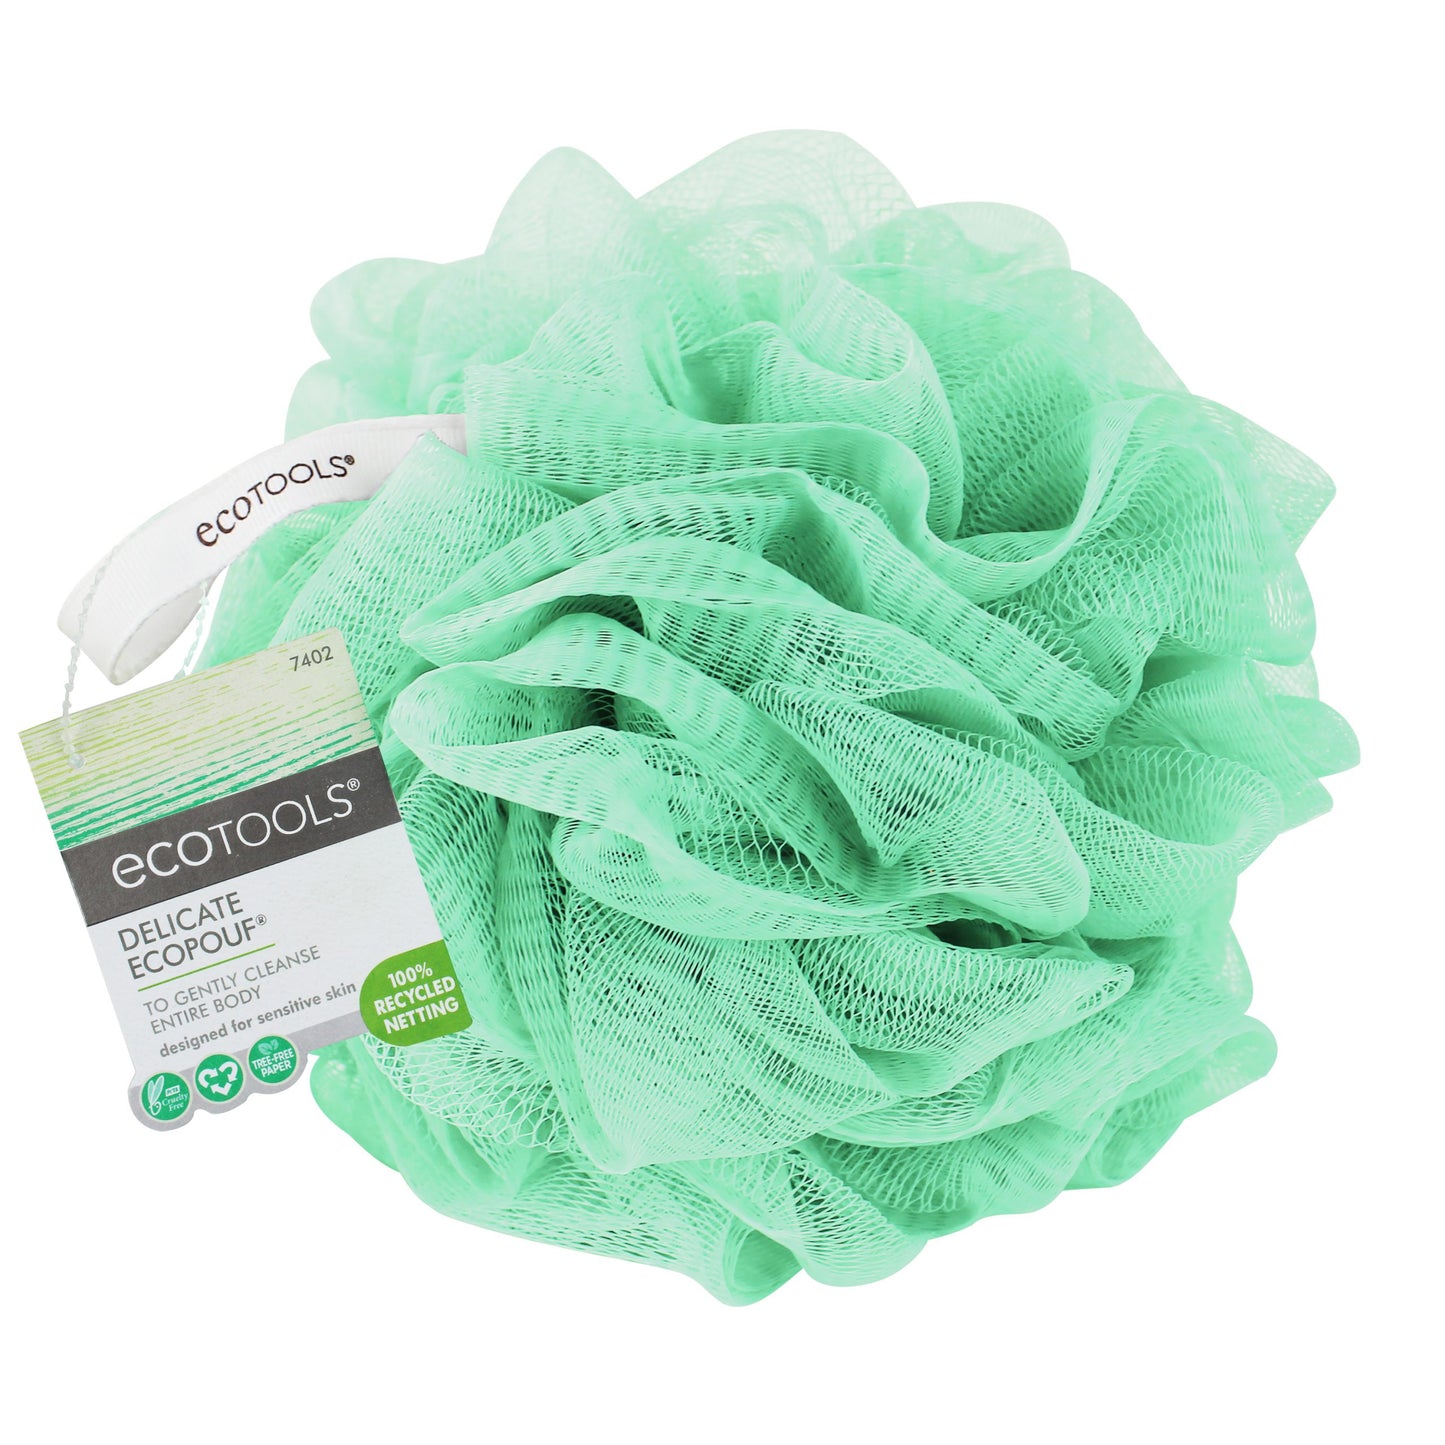 Eco Tools EcoPouf Delicate Sponge For Sensitive Skin, Soft and Cleansing